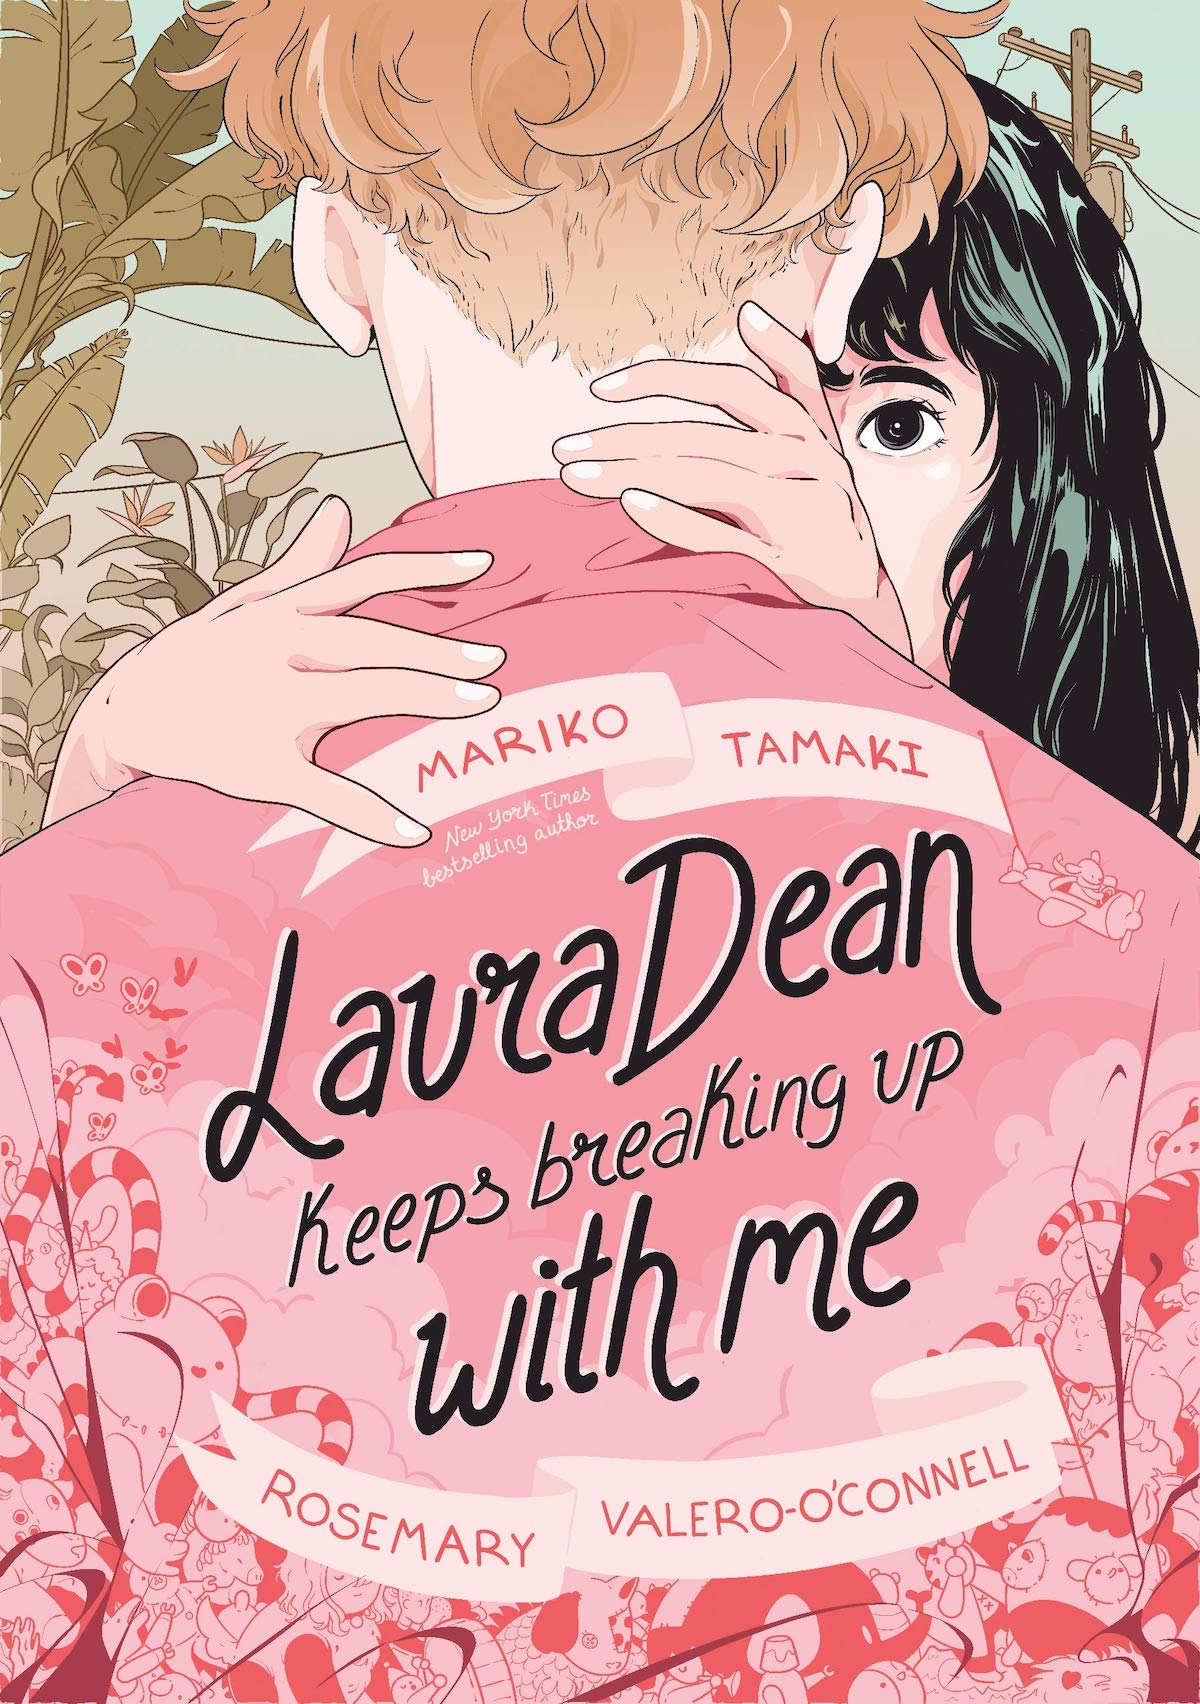 The 100 Best Comics of the Decade: Laura Dean Keeps Breaking Up With Me